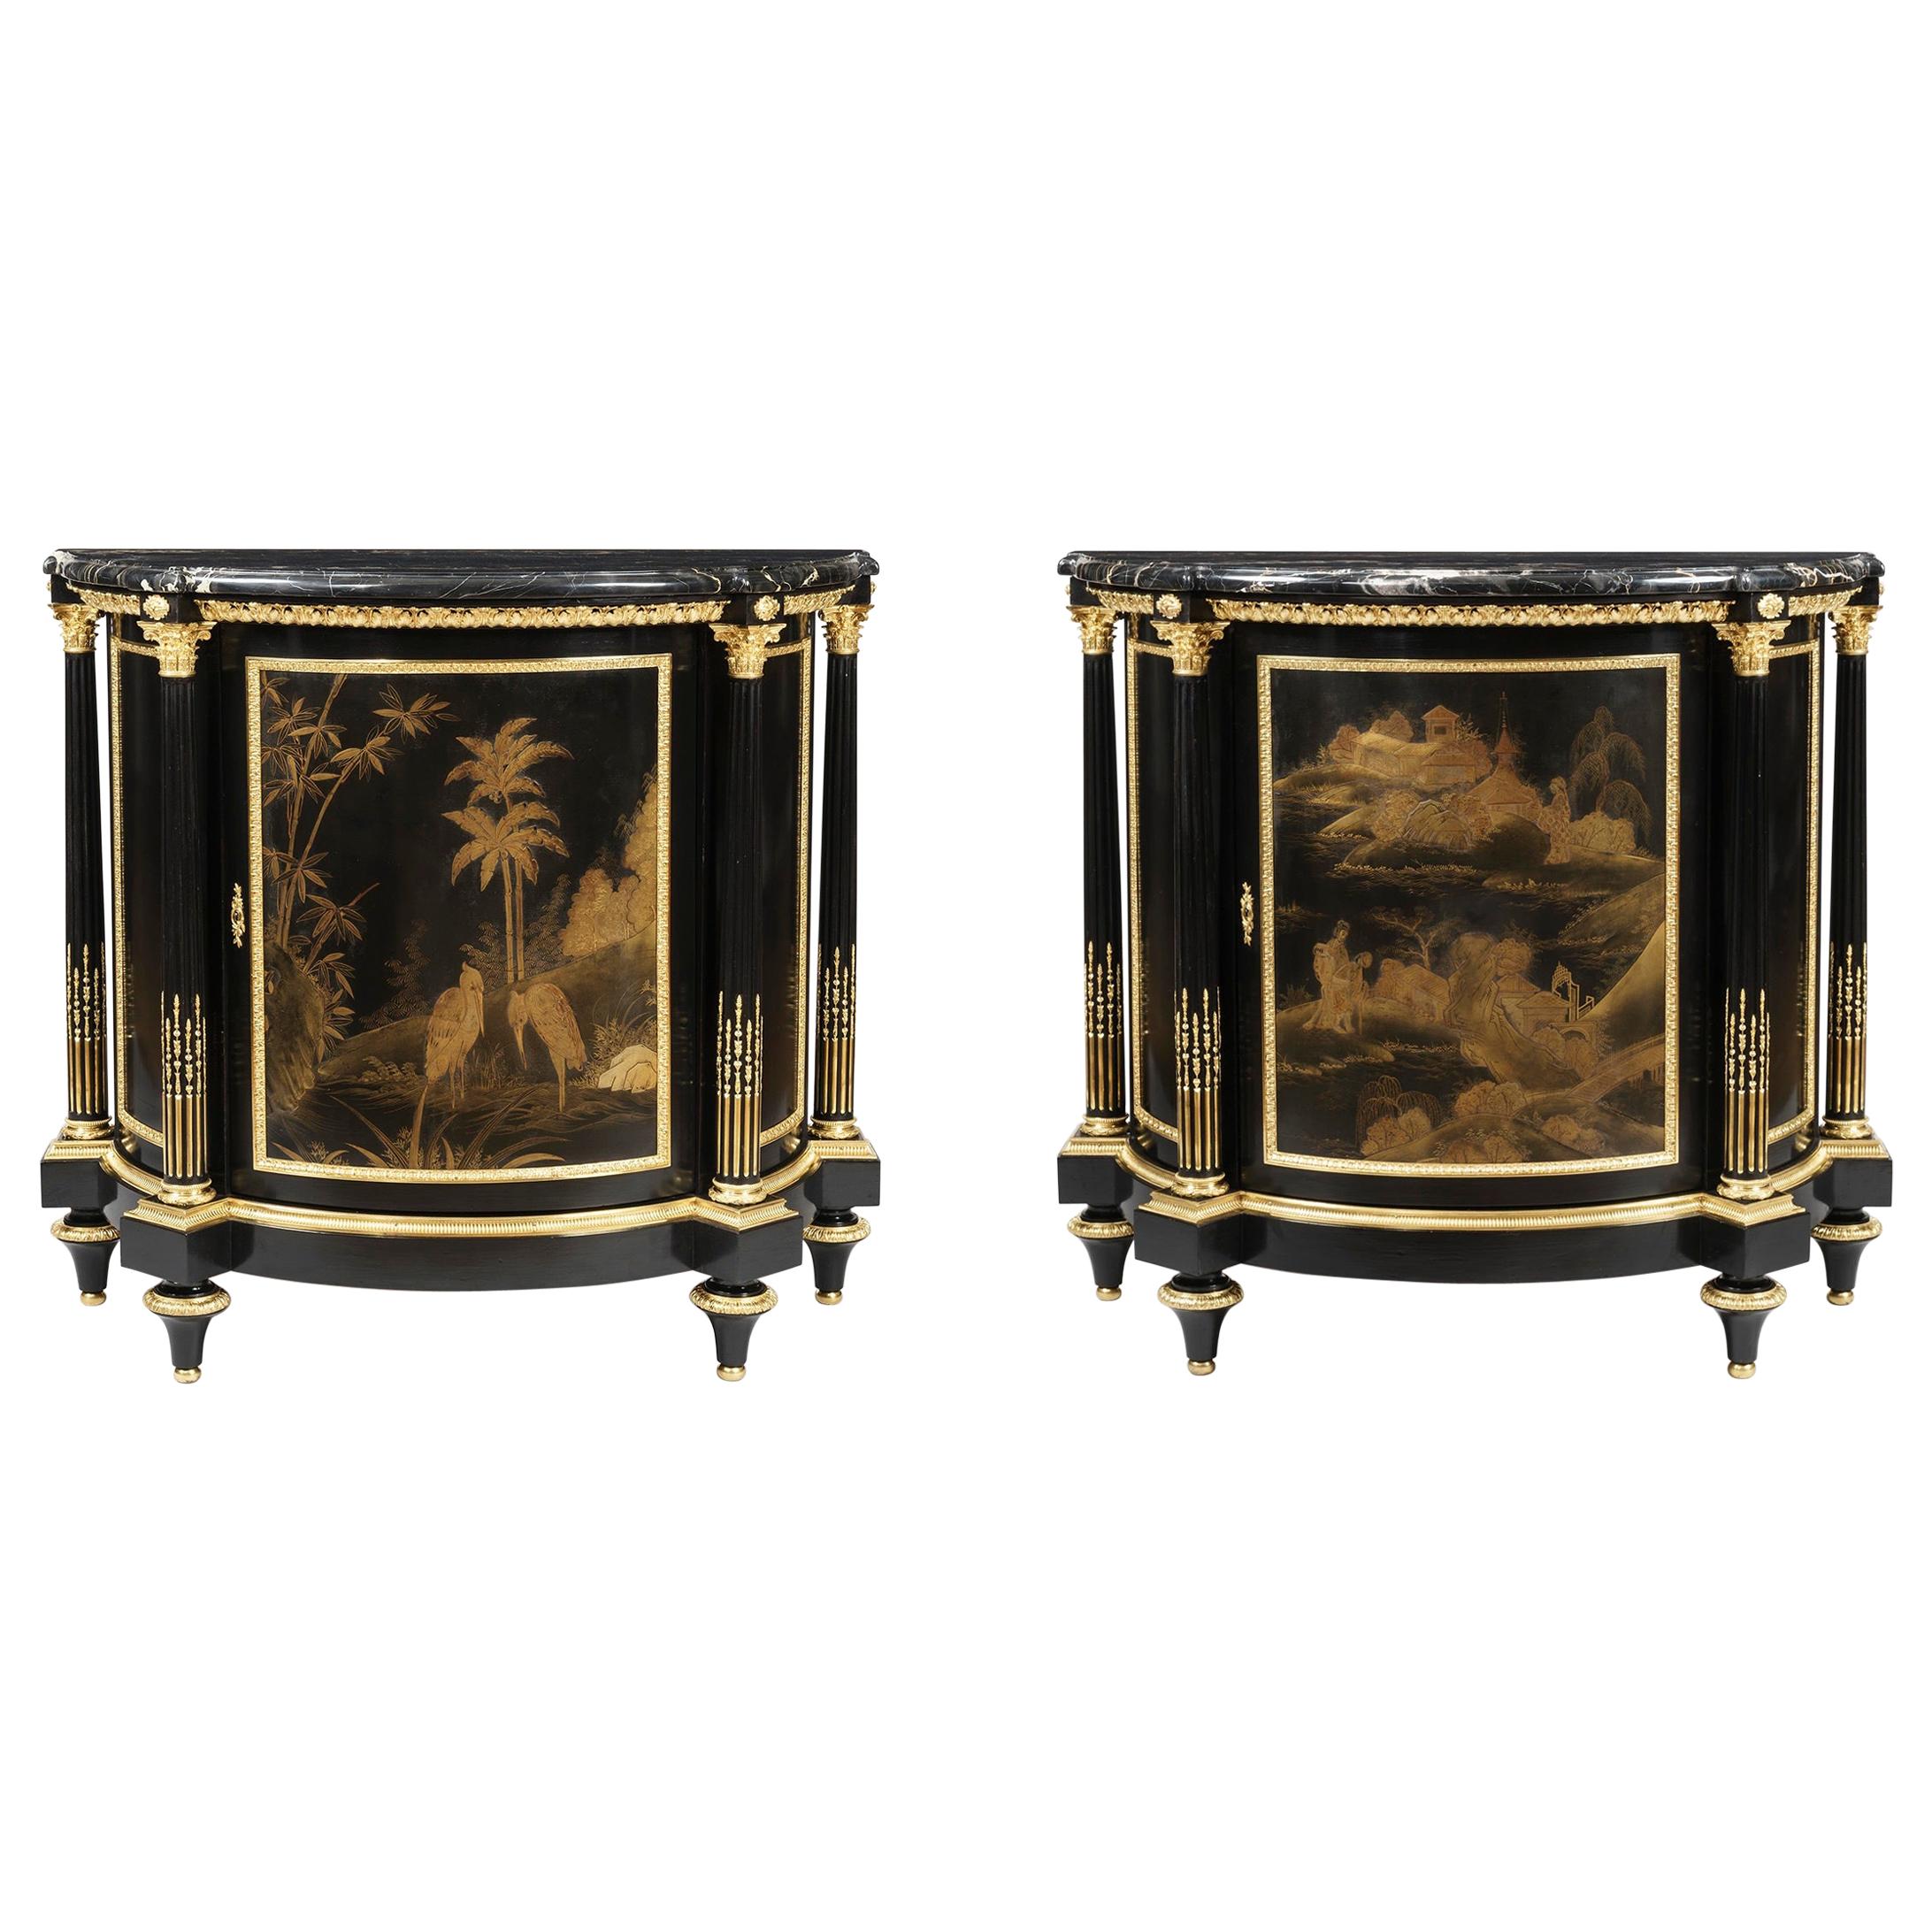 Pair of Lacquer and Ormolu-Mounted Cabinets in the Louis XVI Manner by Millet